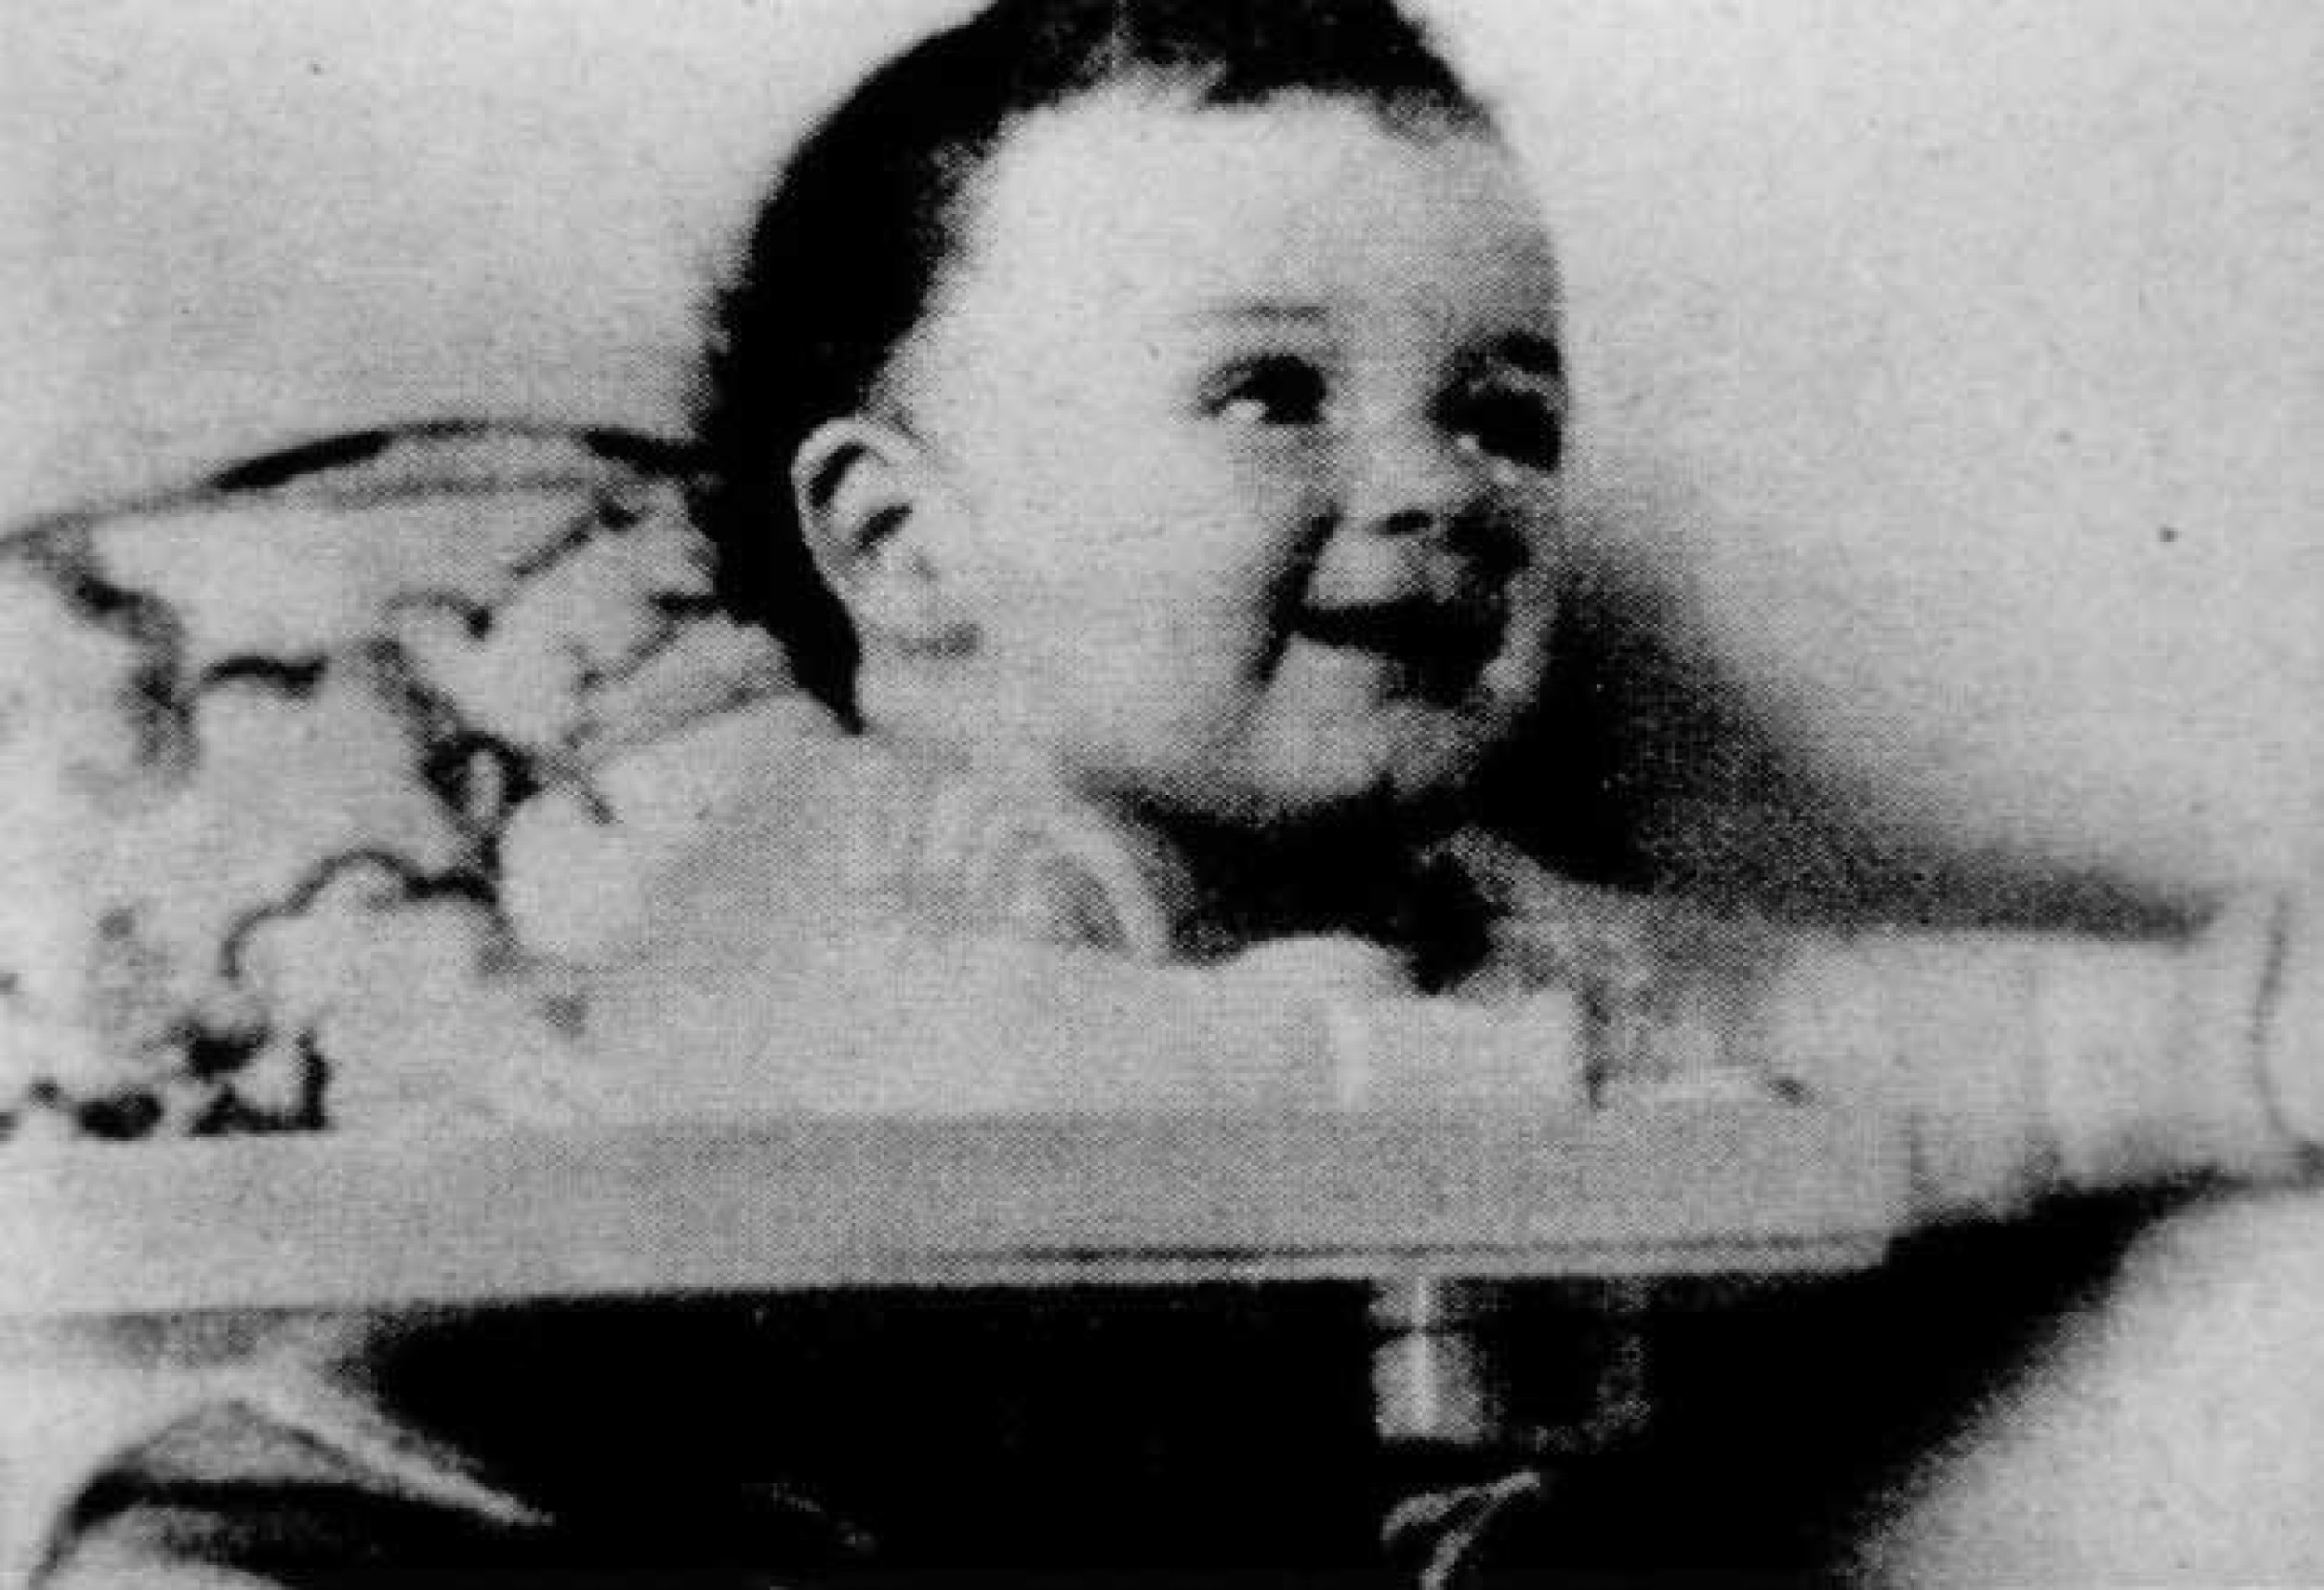 The Lindbergh Baby Kidnapping and murder